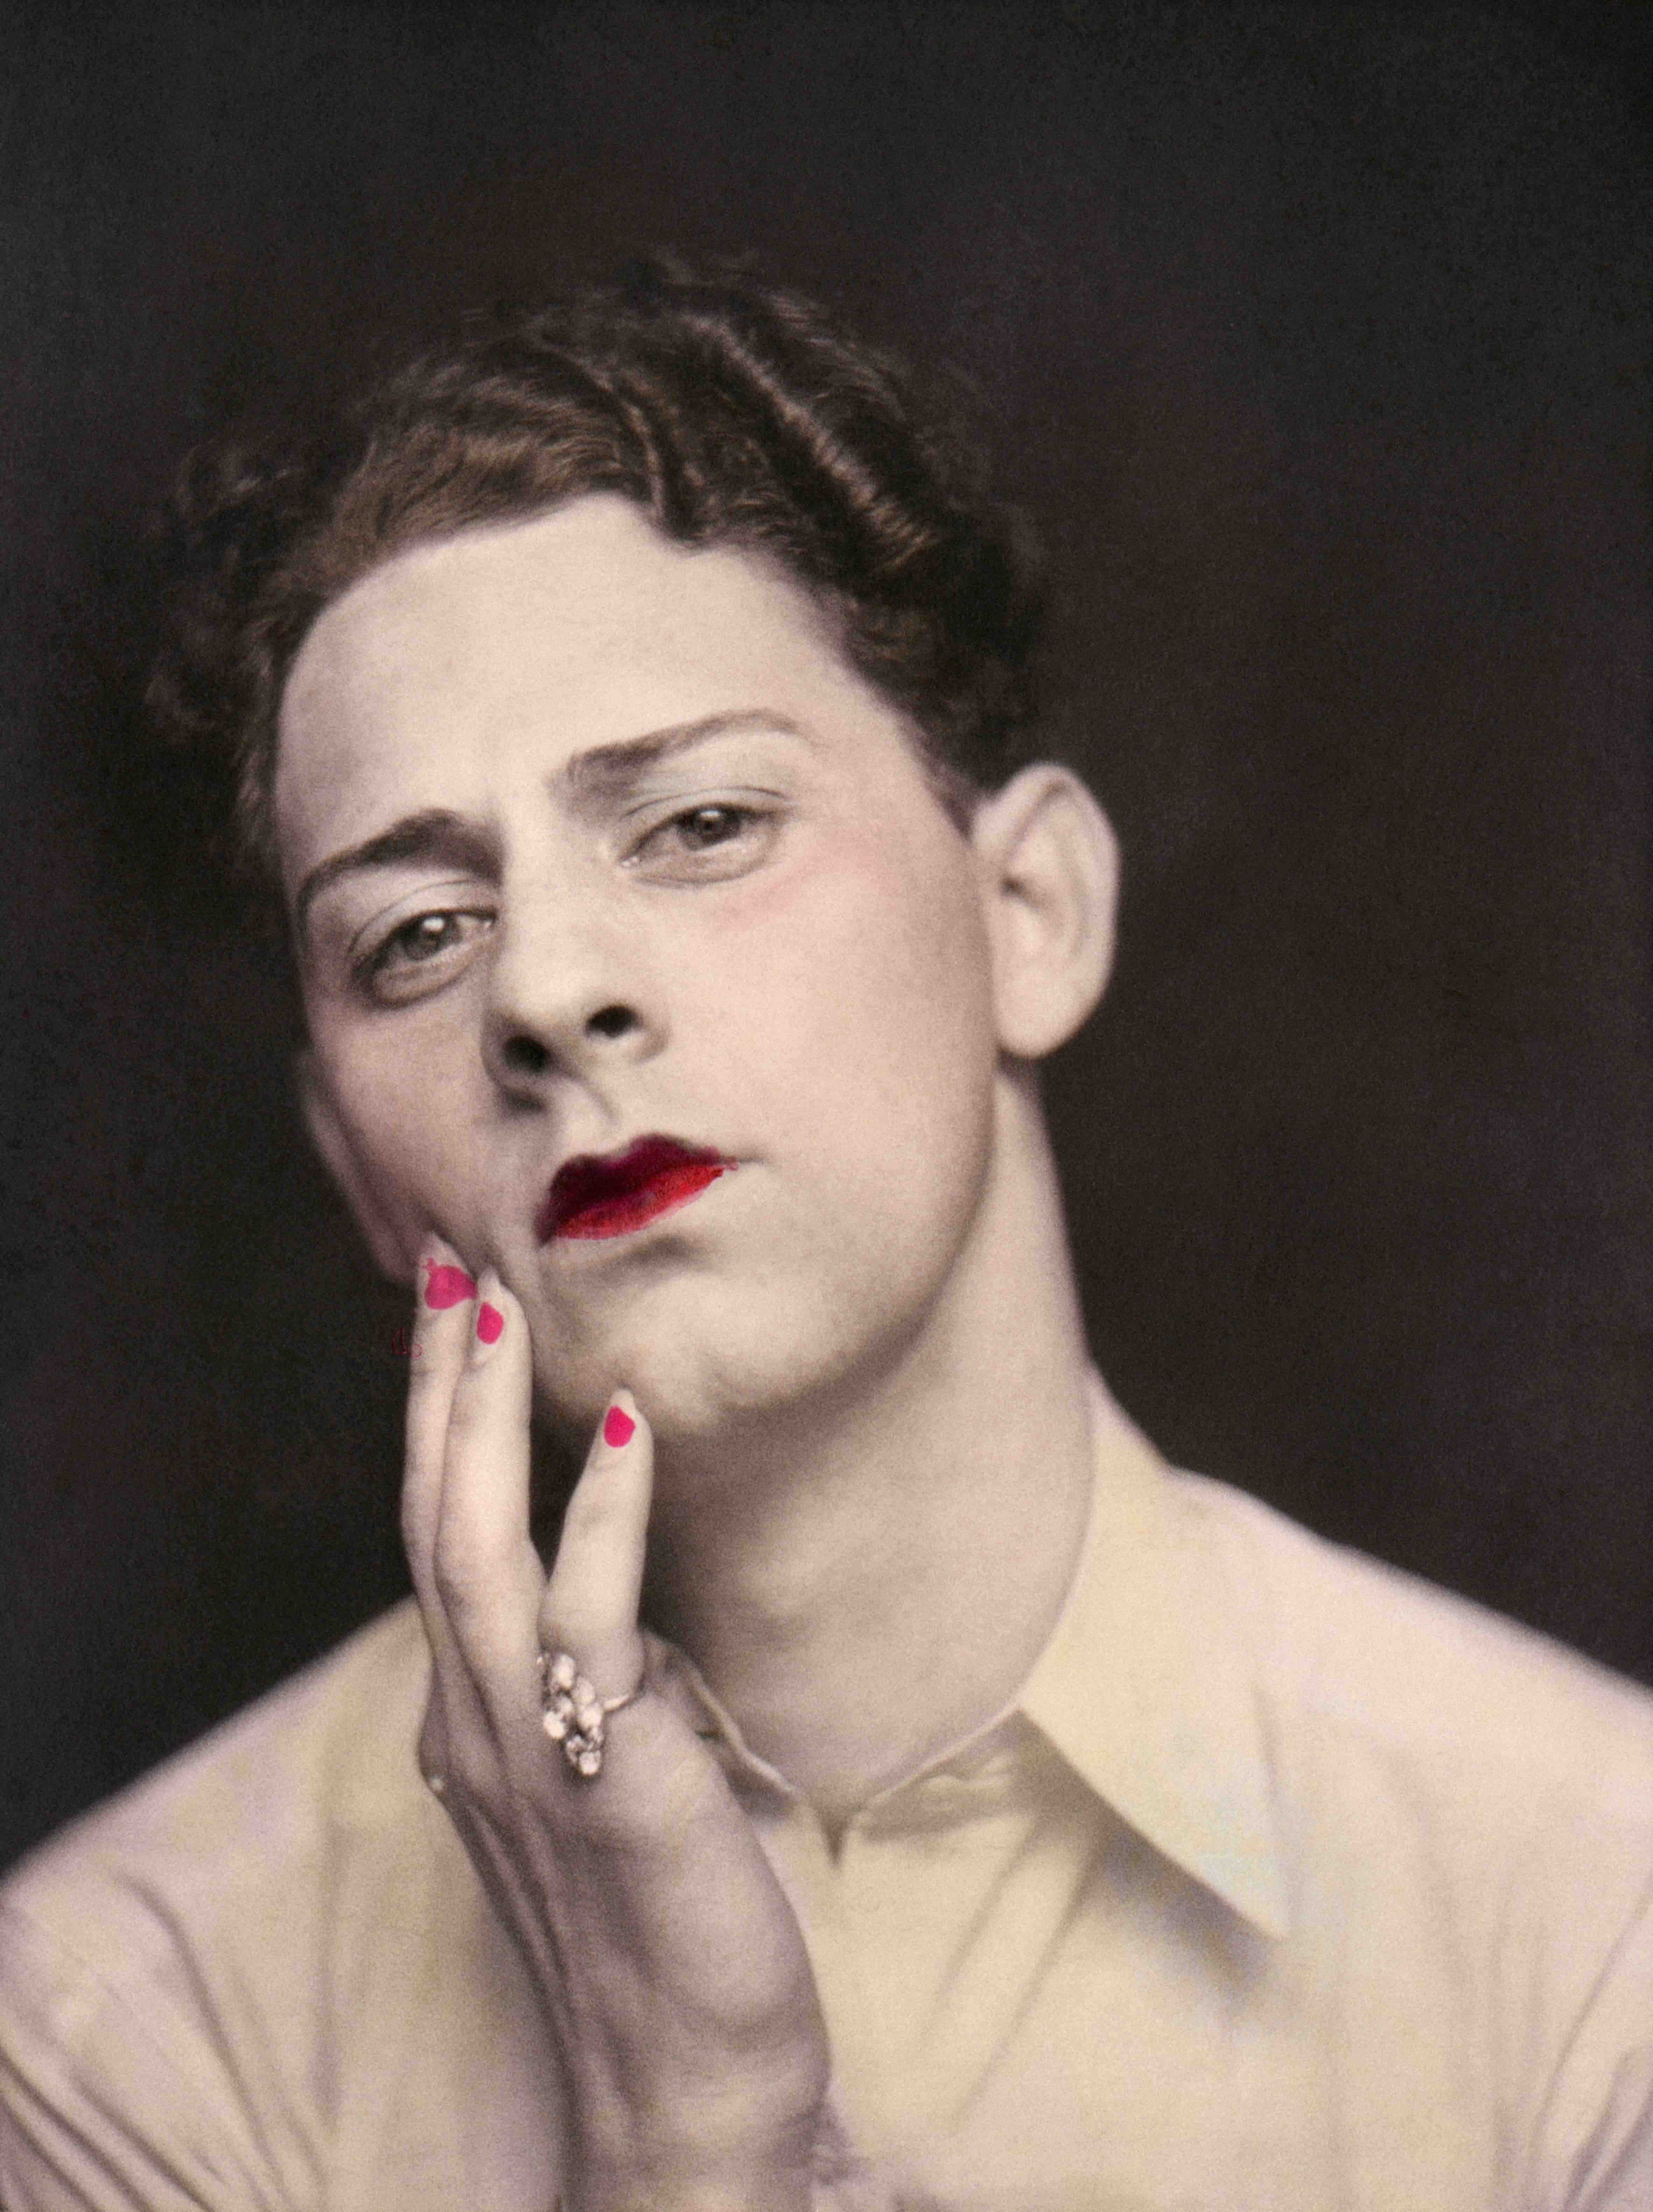 Man in makeup wearing ring. Photograph from a photo booth, with highlights of color. United States, circa 1920. Â© Sebastian Lifshitz Collection